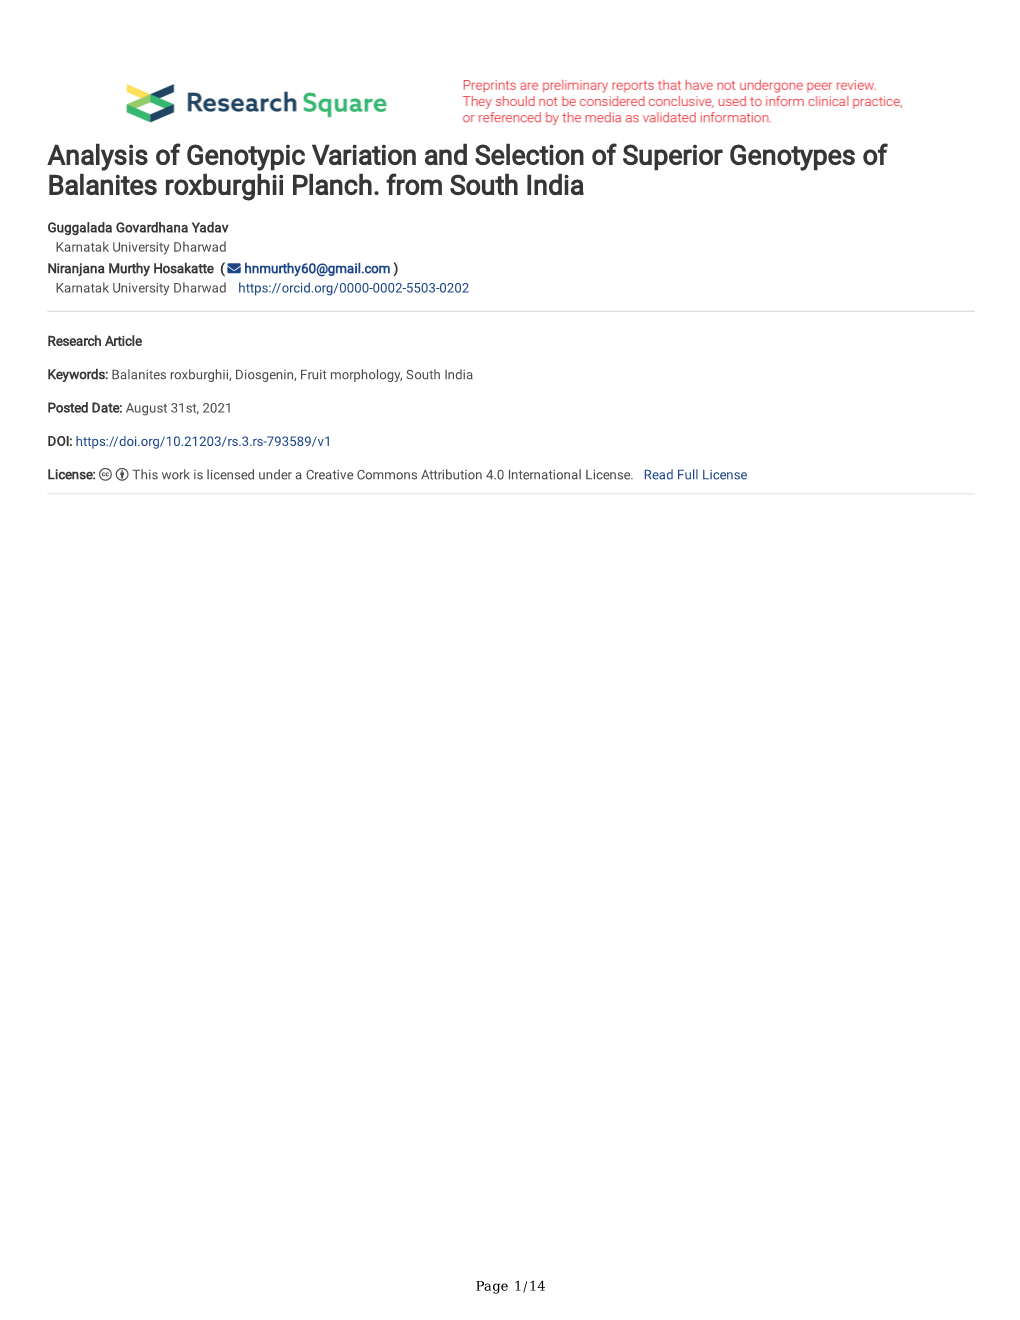 Analysis of Genotypic Variation and Selection of Superior Genotypes of Balanites Roxburghii Planch